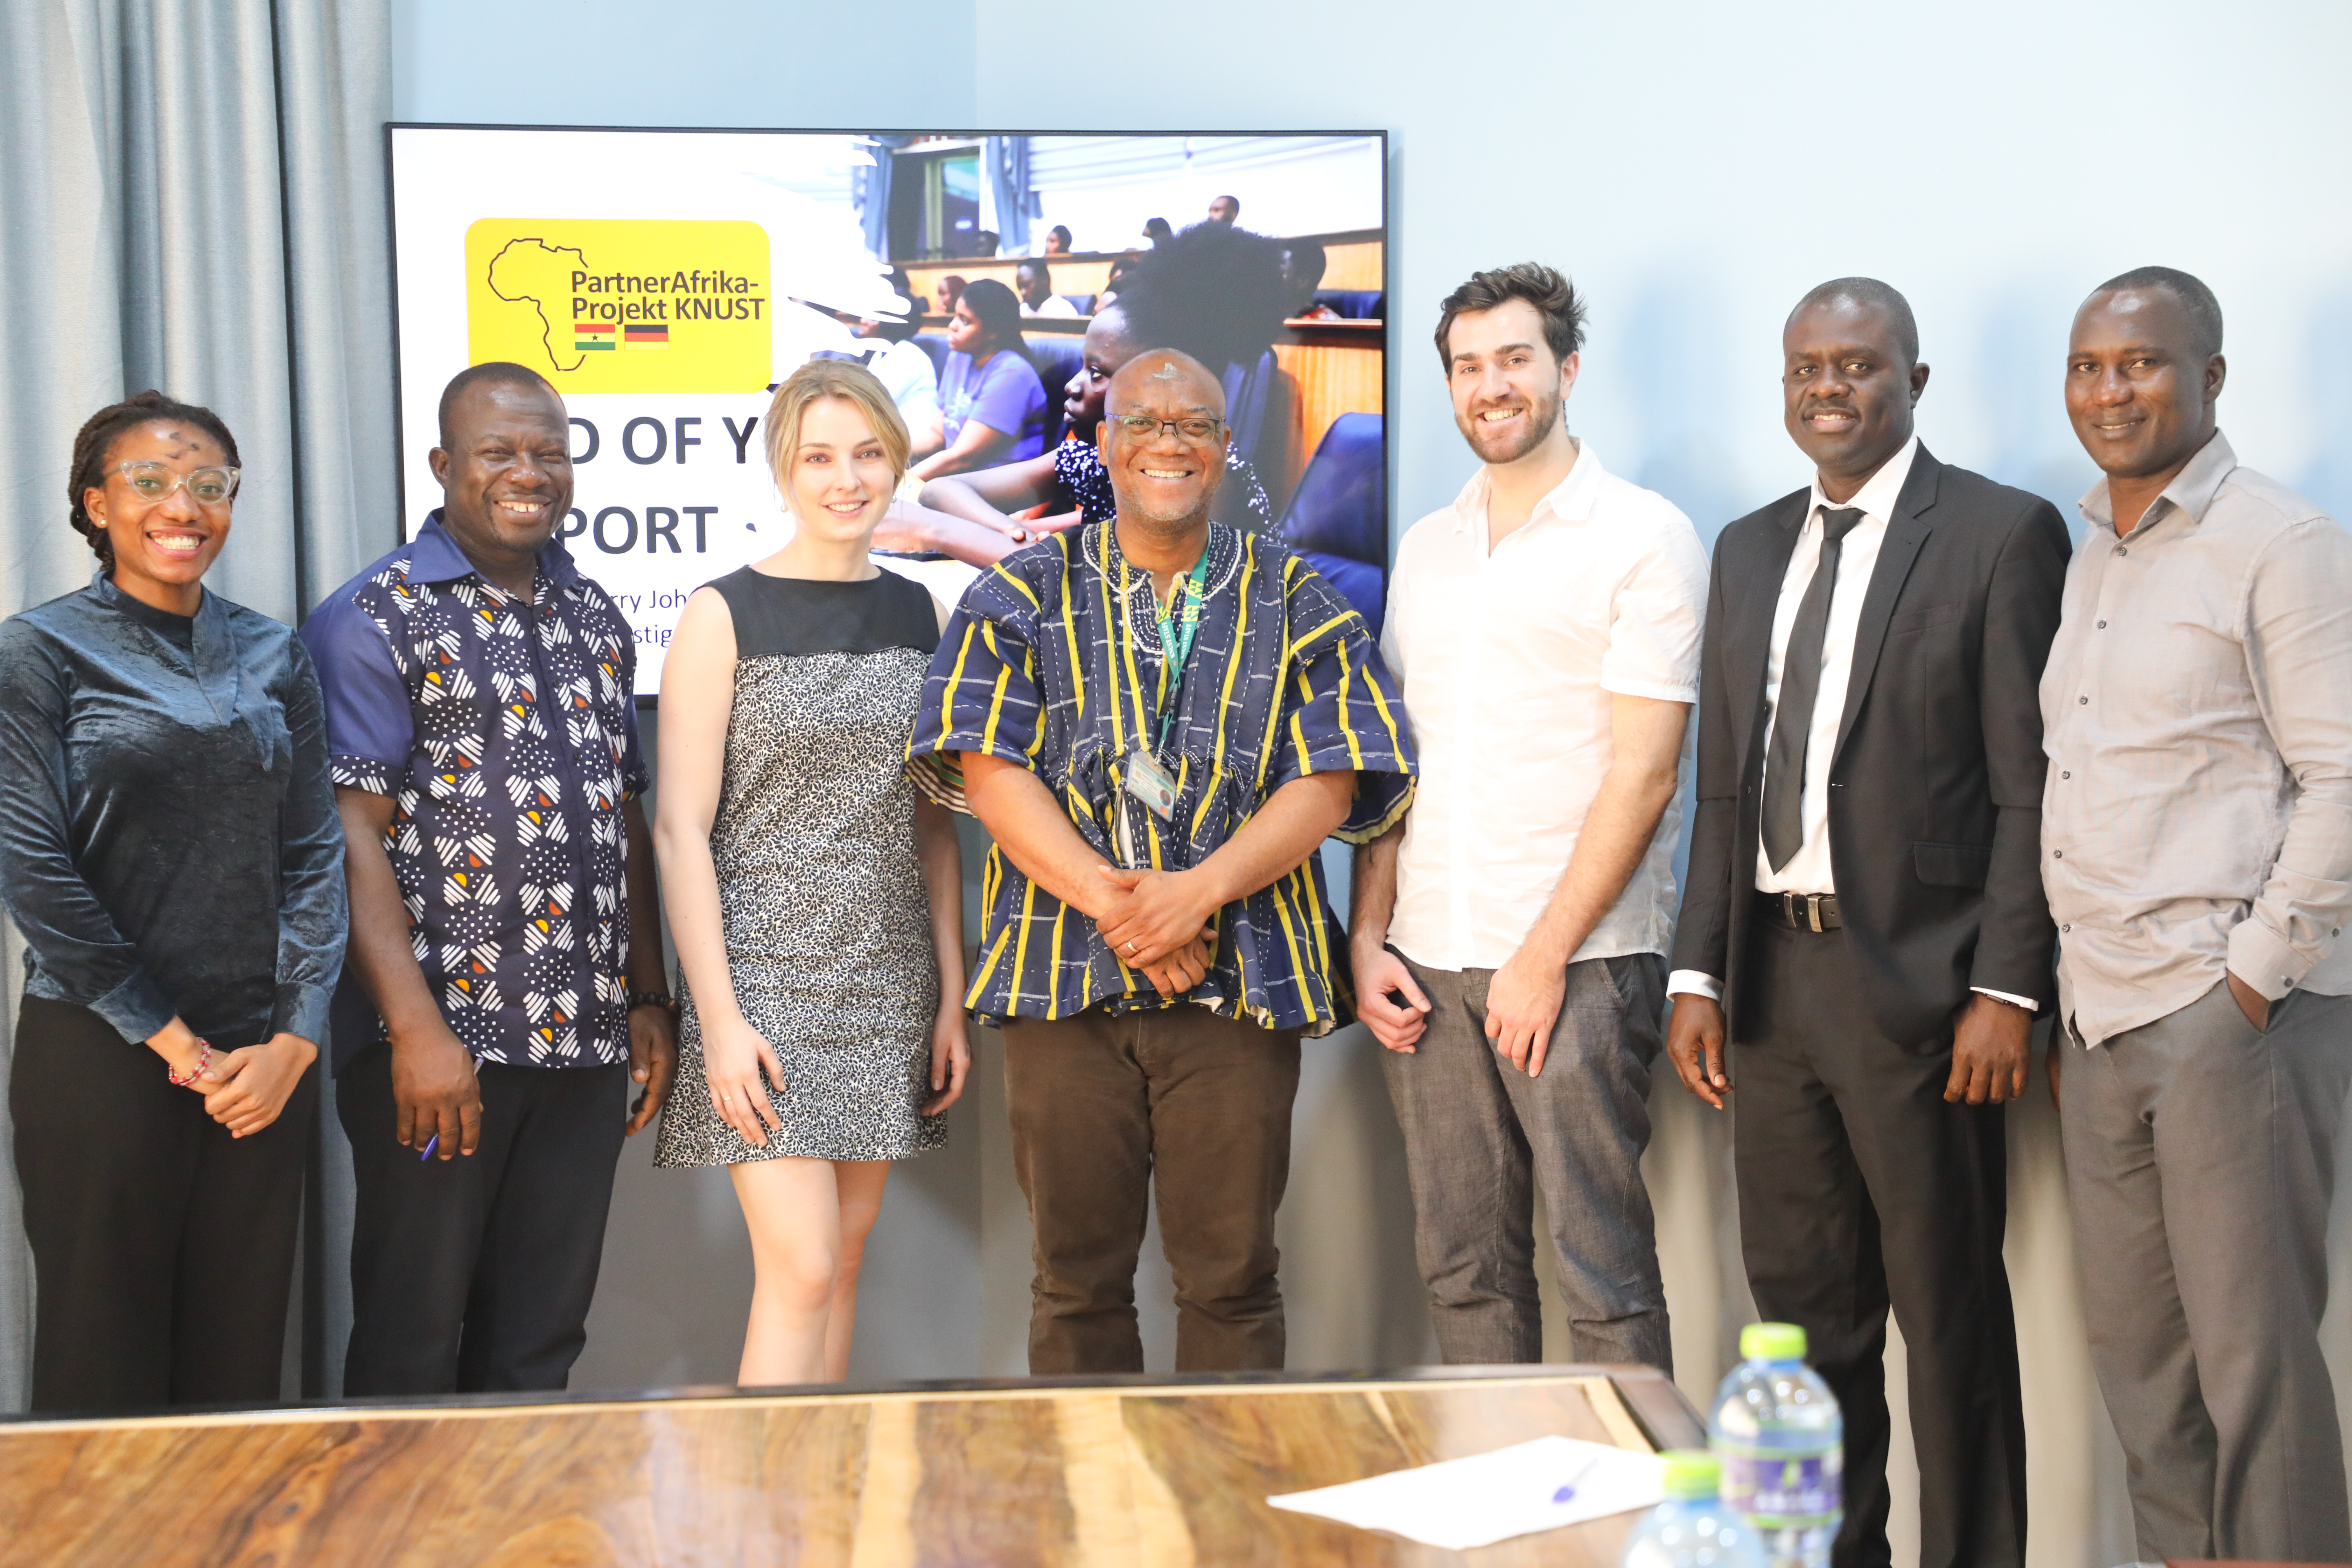 PartnerAfrika-Projekt KNUST Organises Project Review Meeting With Arqum and AGI